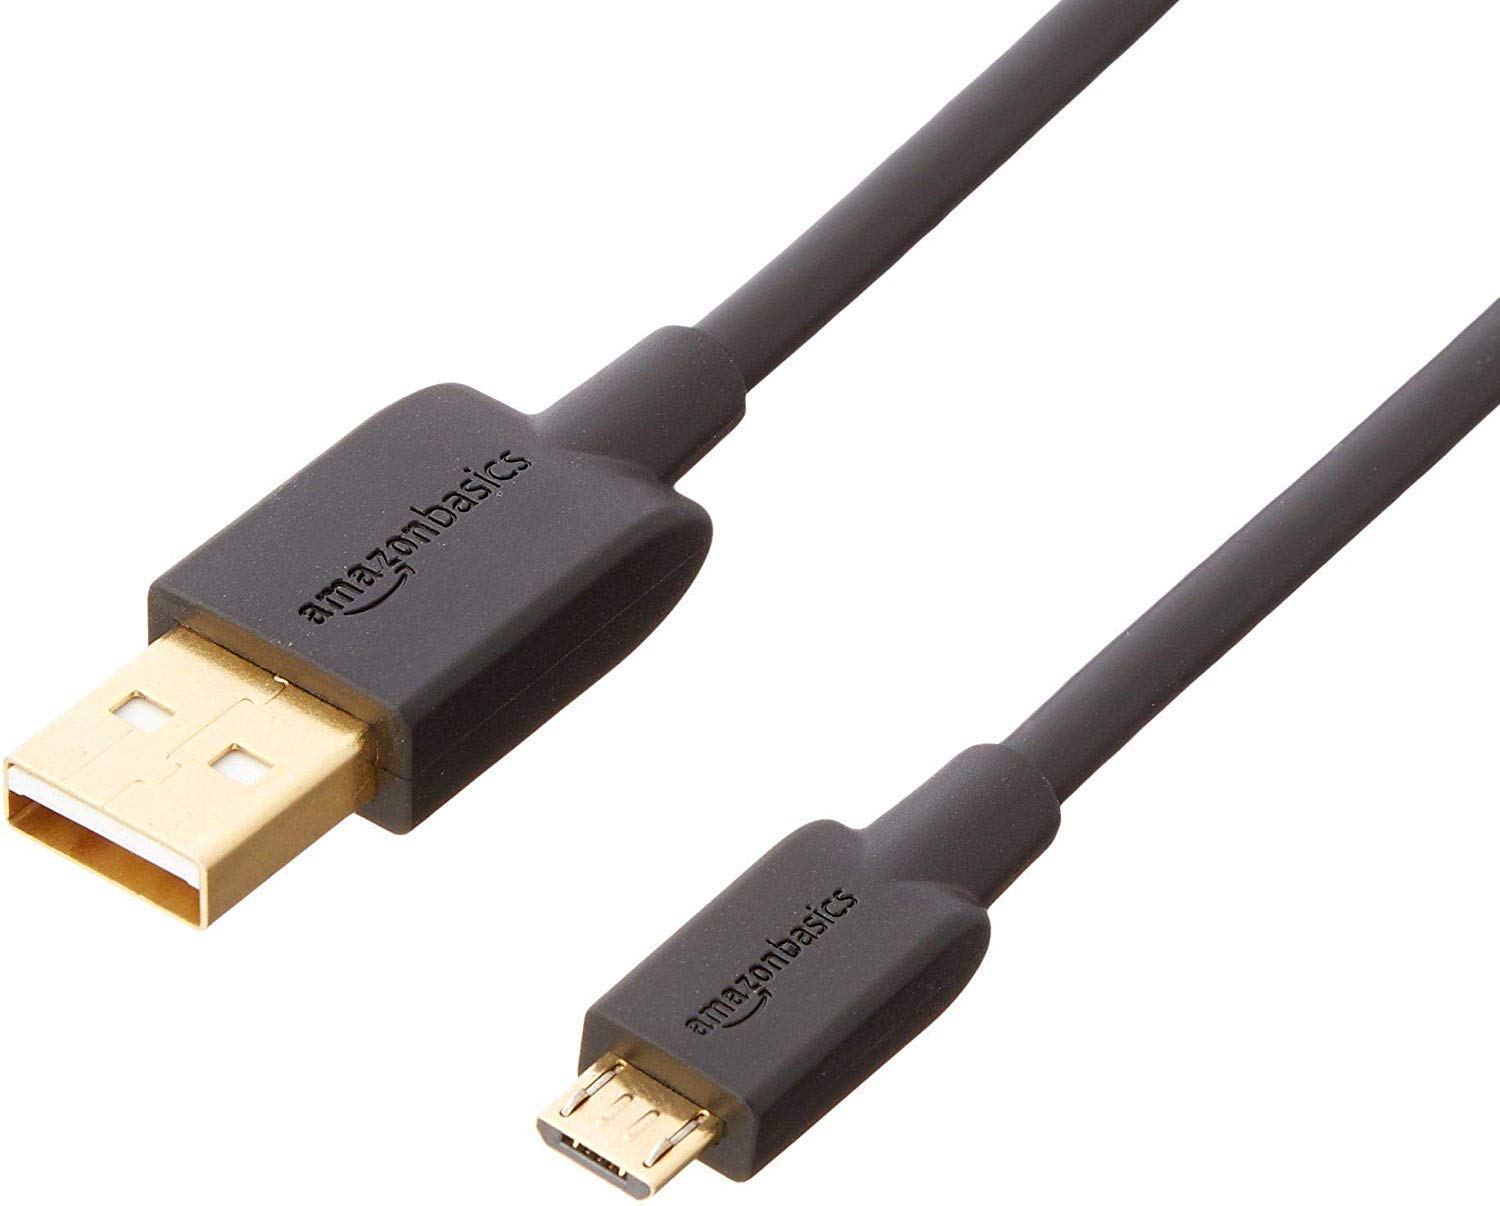 Amazon Basics USB-A to Micro USB Fast Charging Cable, 480Mbps Transfer Speed with Gold-Plated Plugs, USB 2.0, 10 Foot, Black